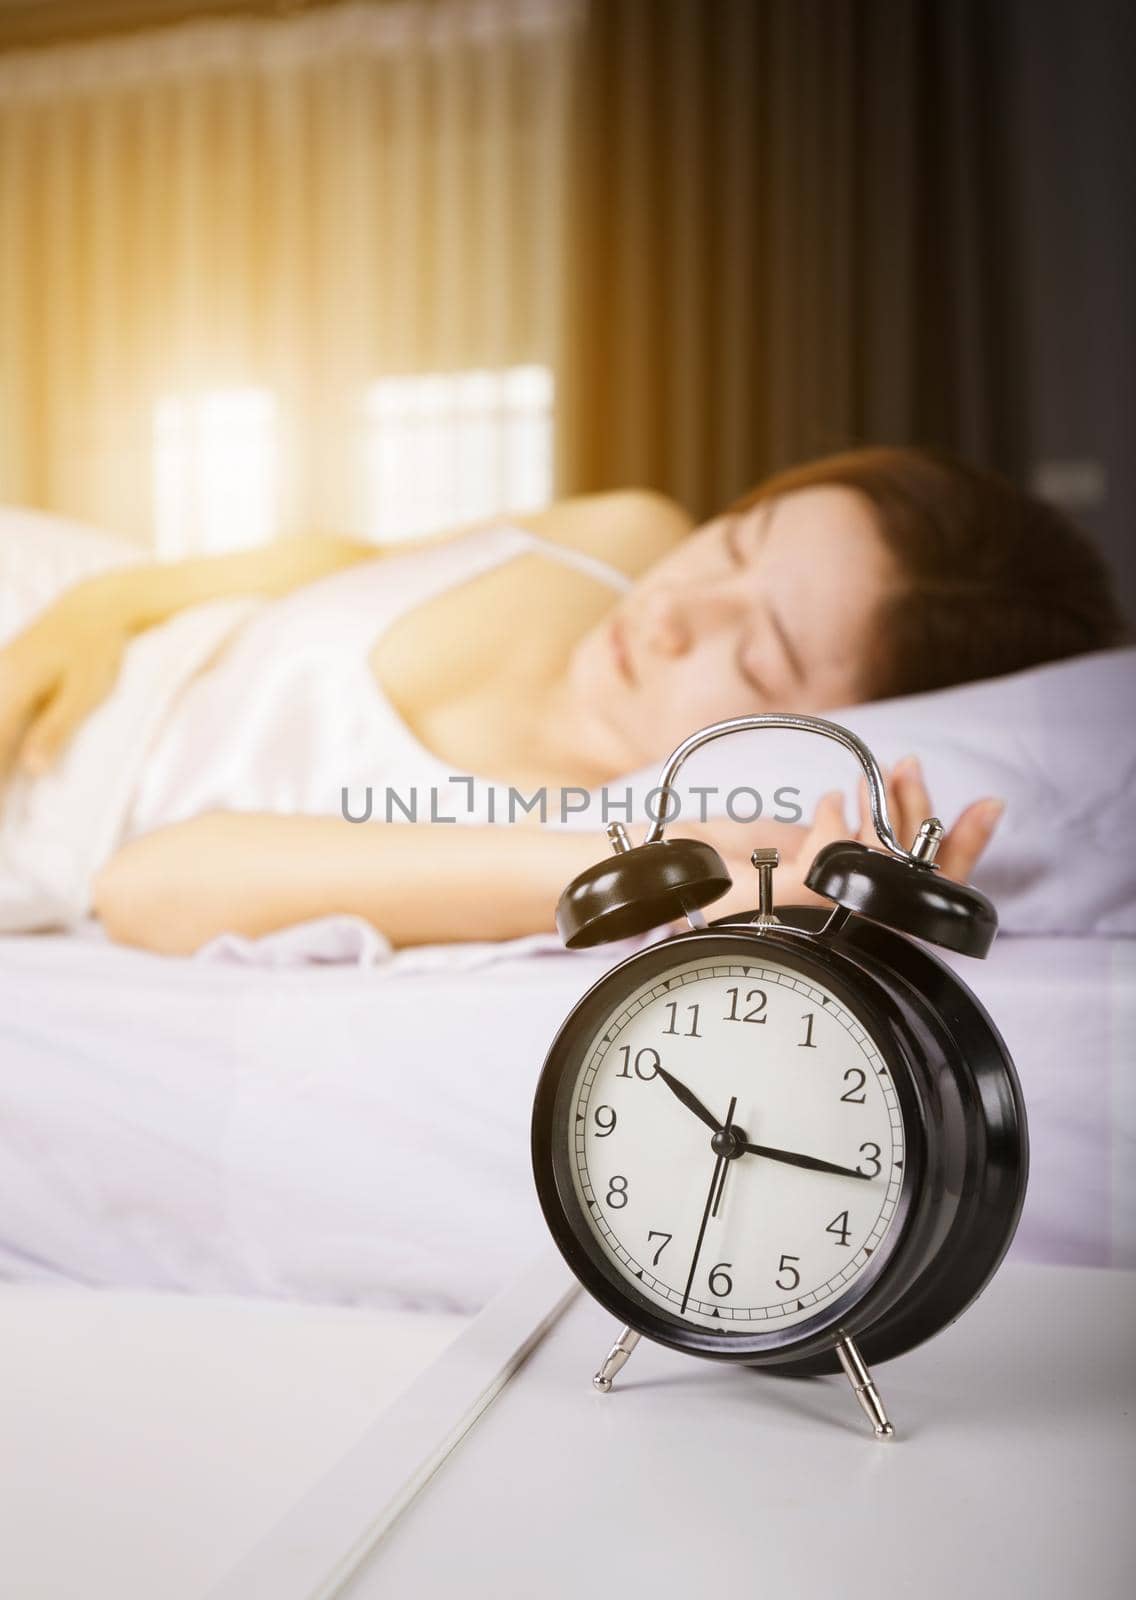 clock show 10 am. and woman sleeping on bed with sunlight in the morning